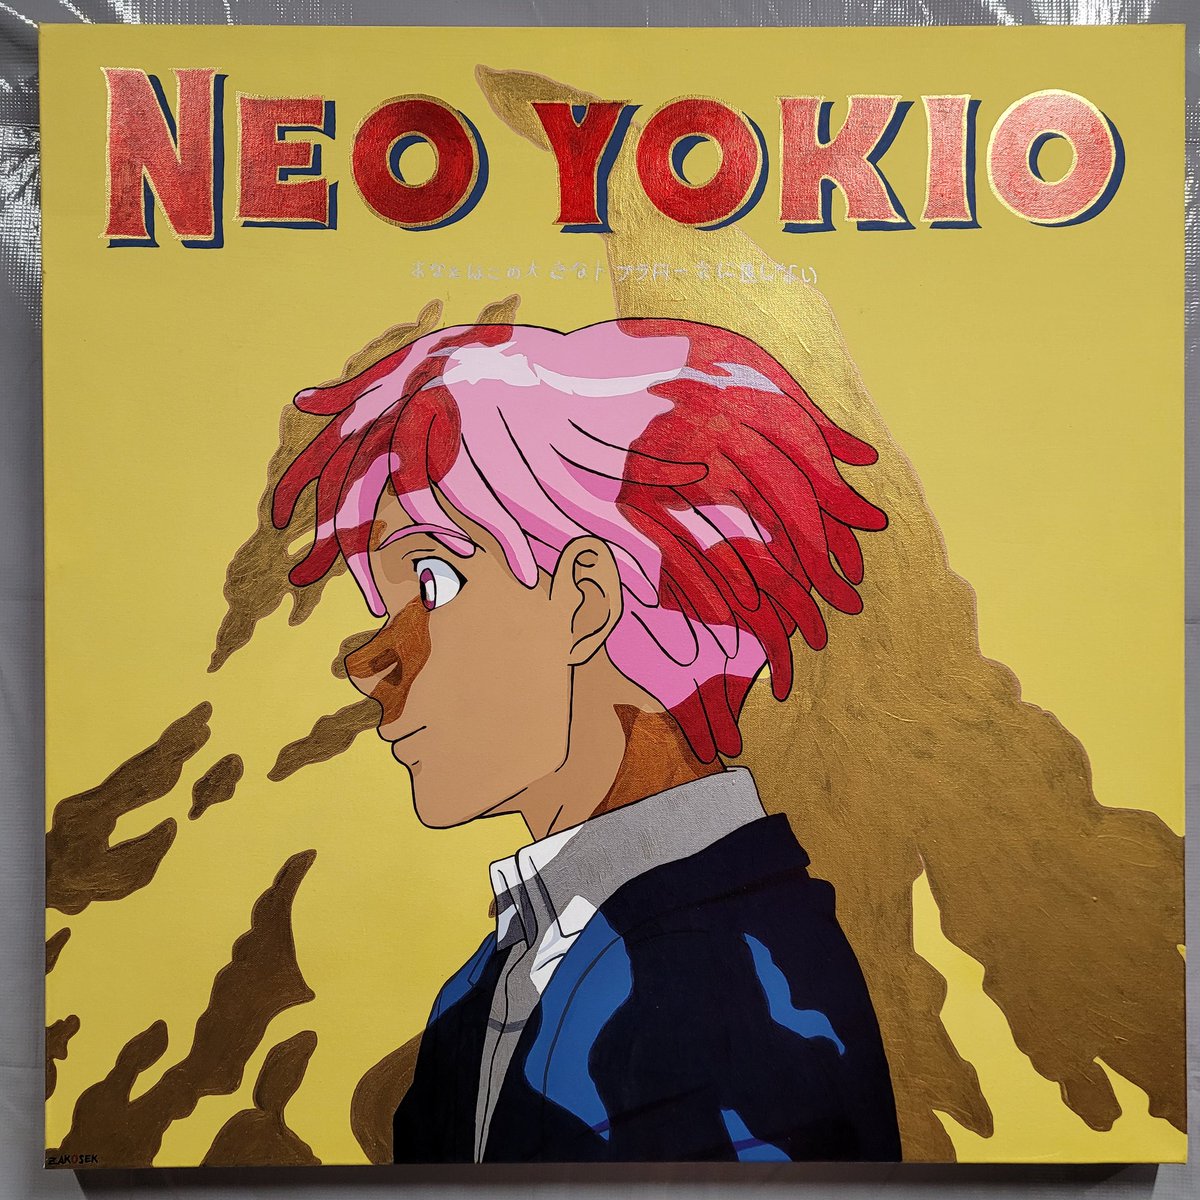 #neoyokio painting I did of Kaz Kaan. All parts of Kaz and the background that overlap the mountain are done in metallics. 30'×30' instagram.com/zakosekart
@arzE #netflix #anime #vampireweekend #cartoon #kazkaan #toblerone